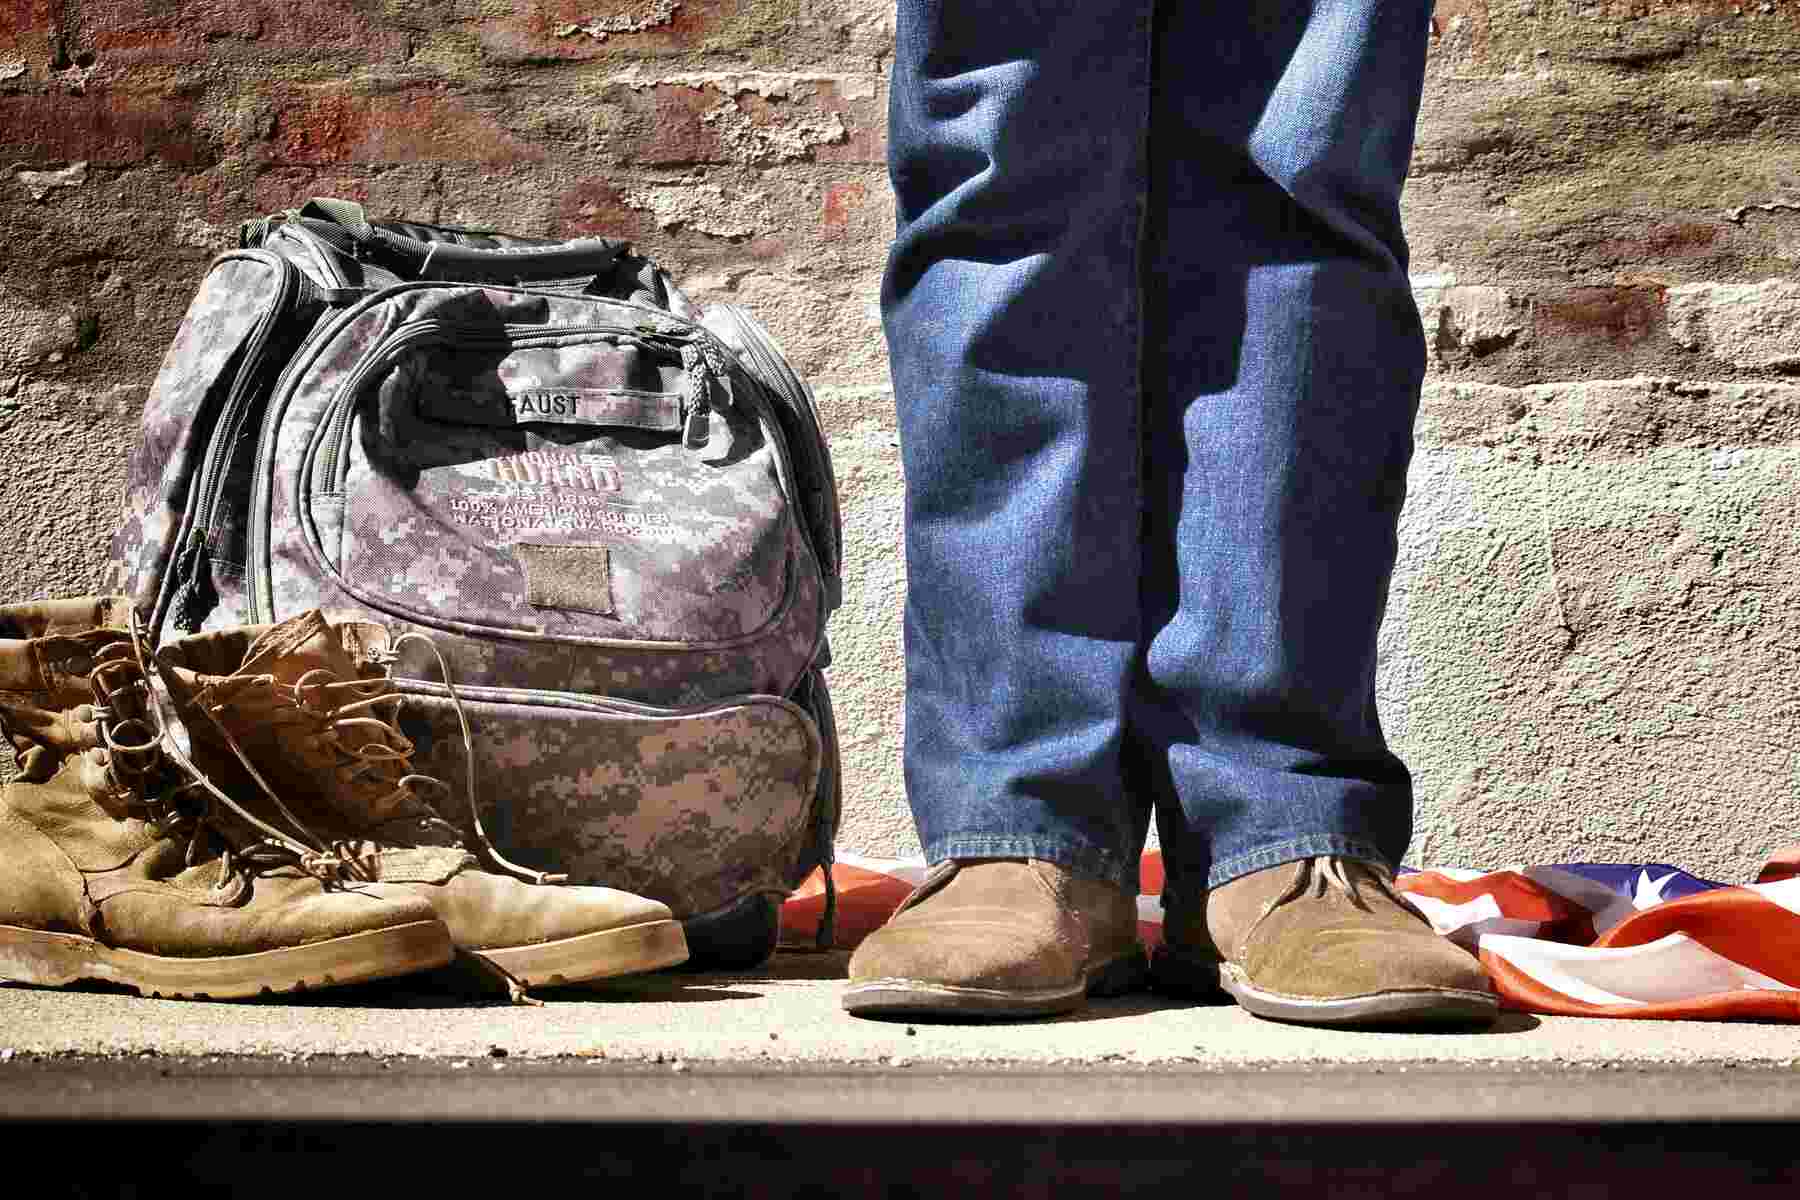 A man standing behind an army bag and shoes